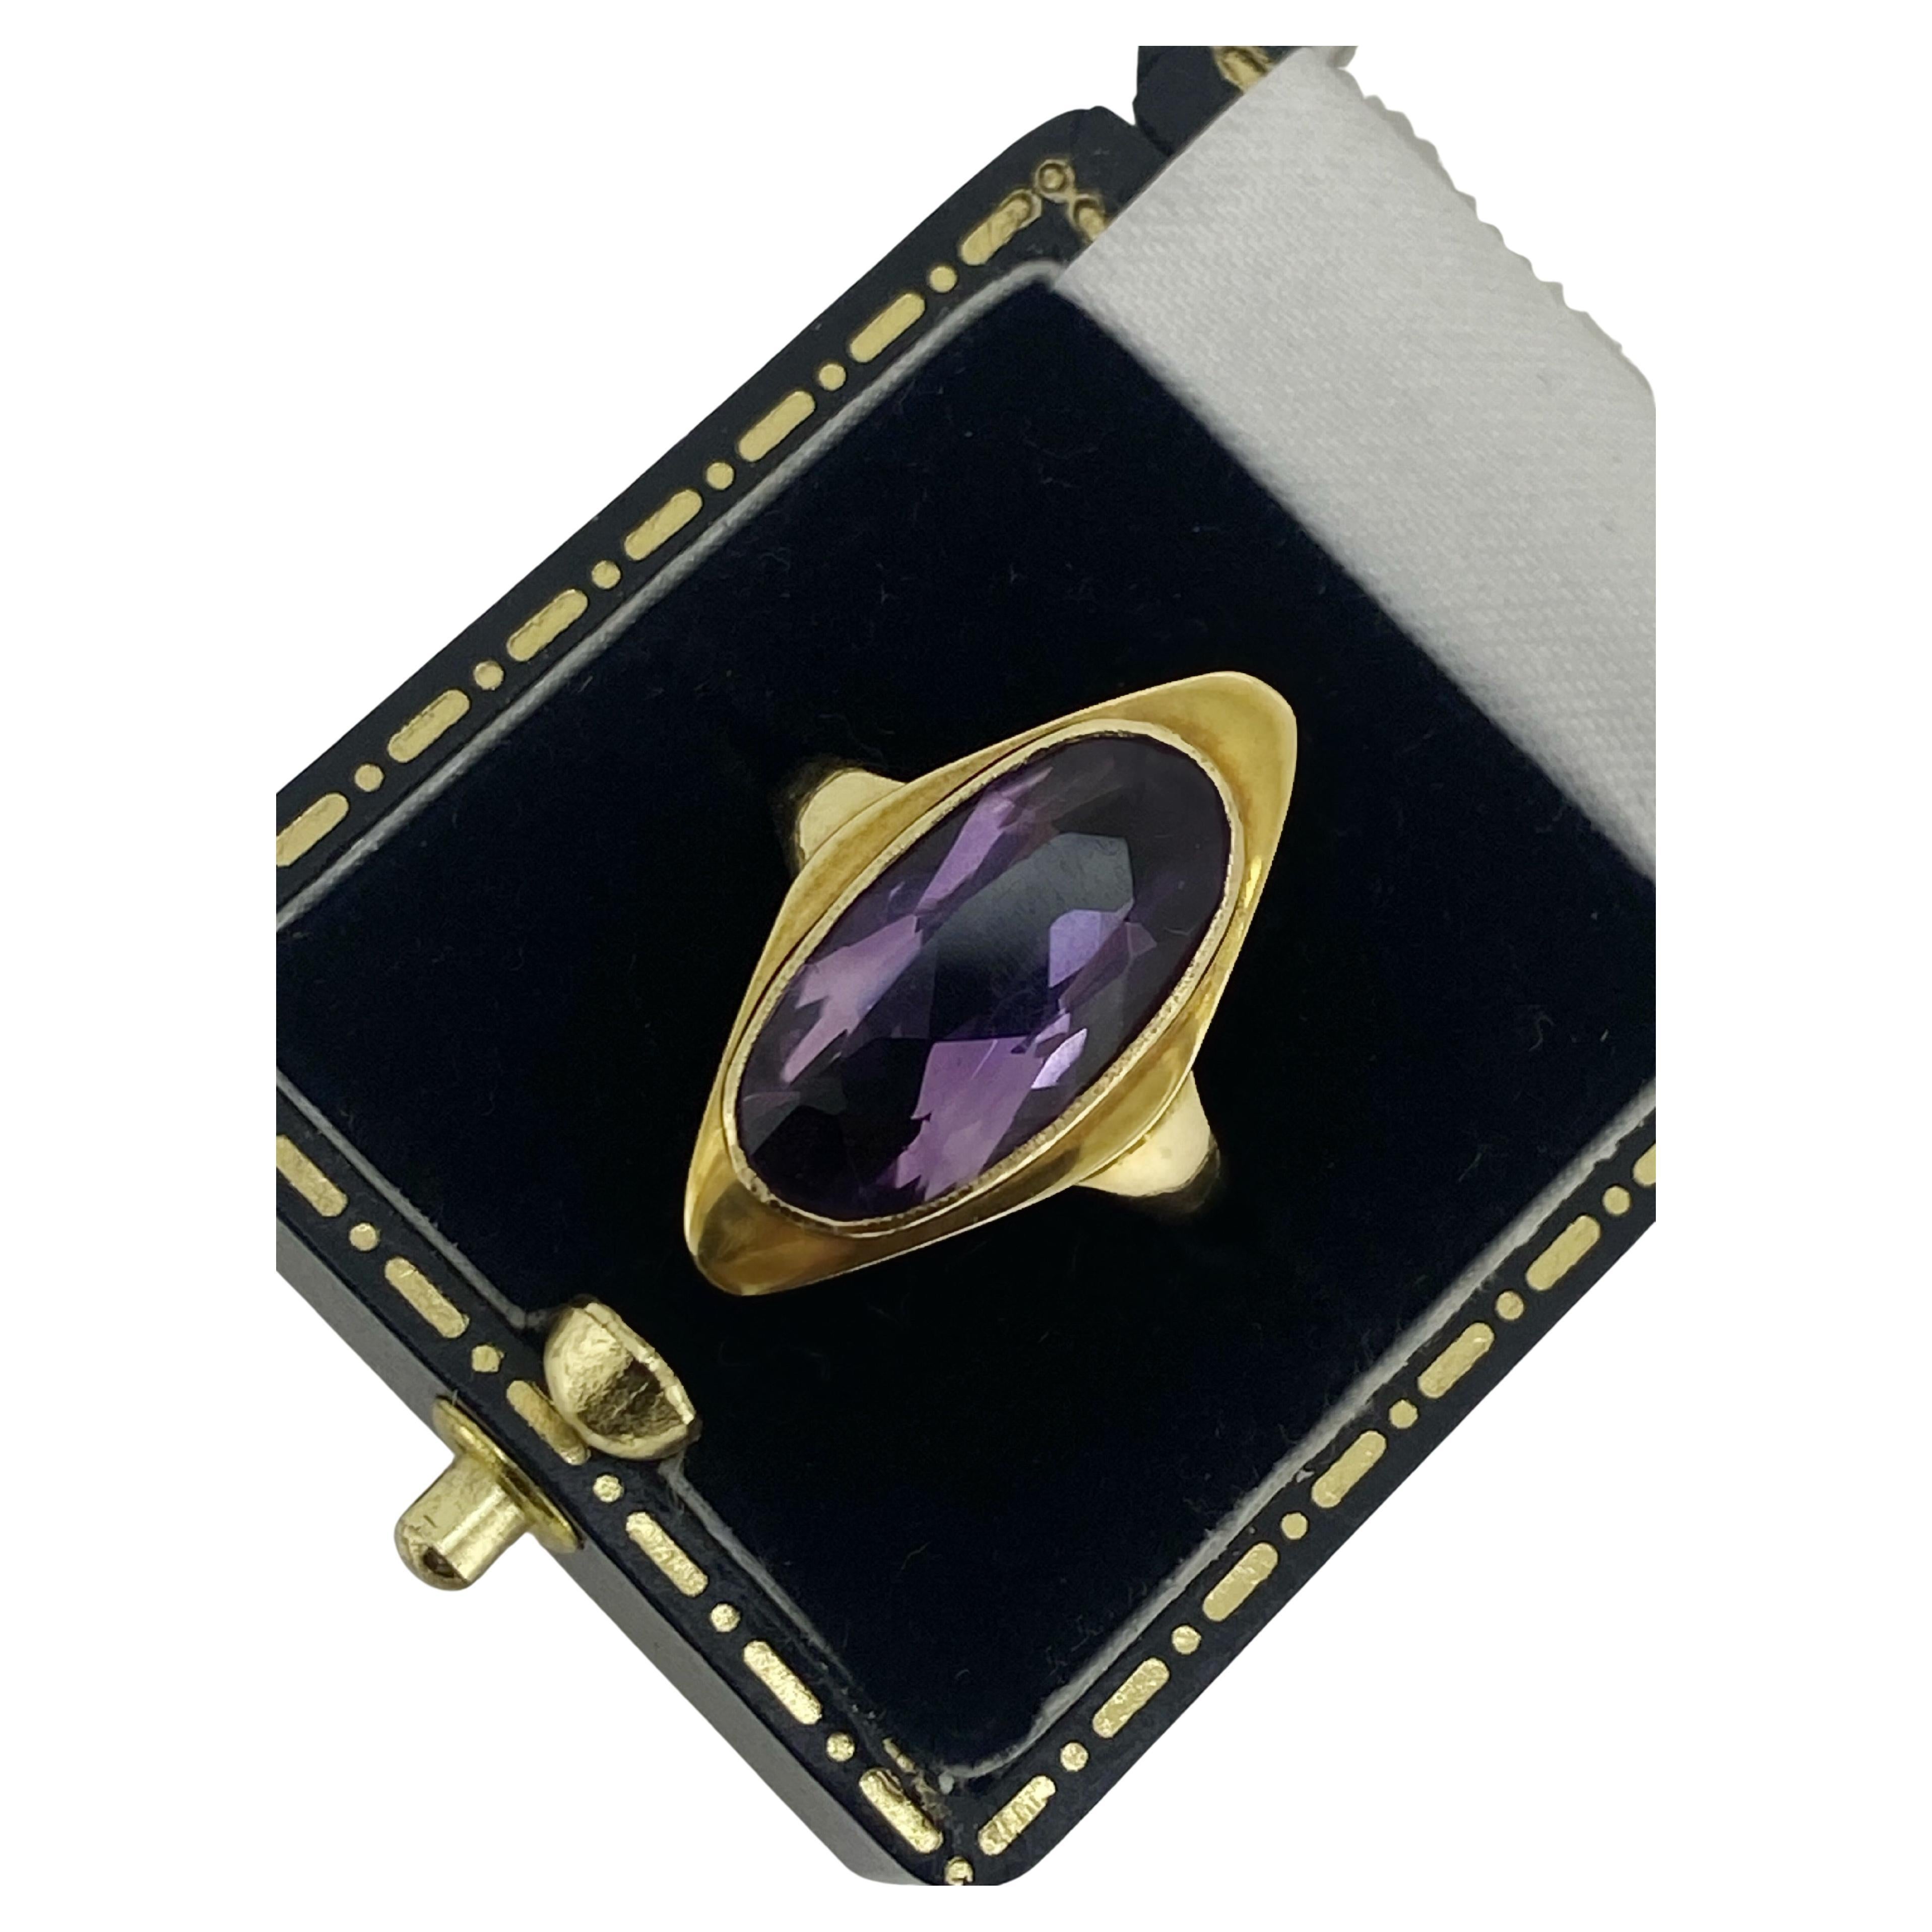 3.00ct Royal Purple Amethyst Ring in 9K Yellow Gold, c1964, English Hallmarks. For Sale